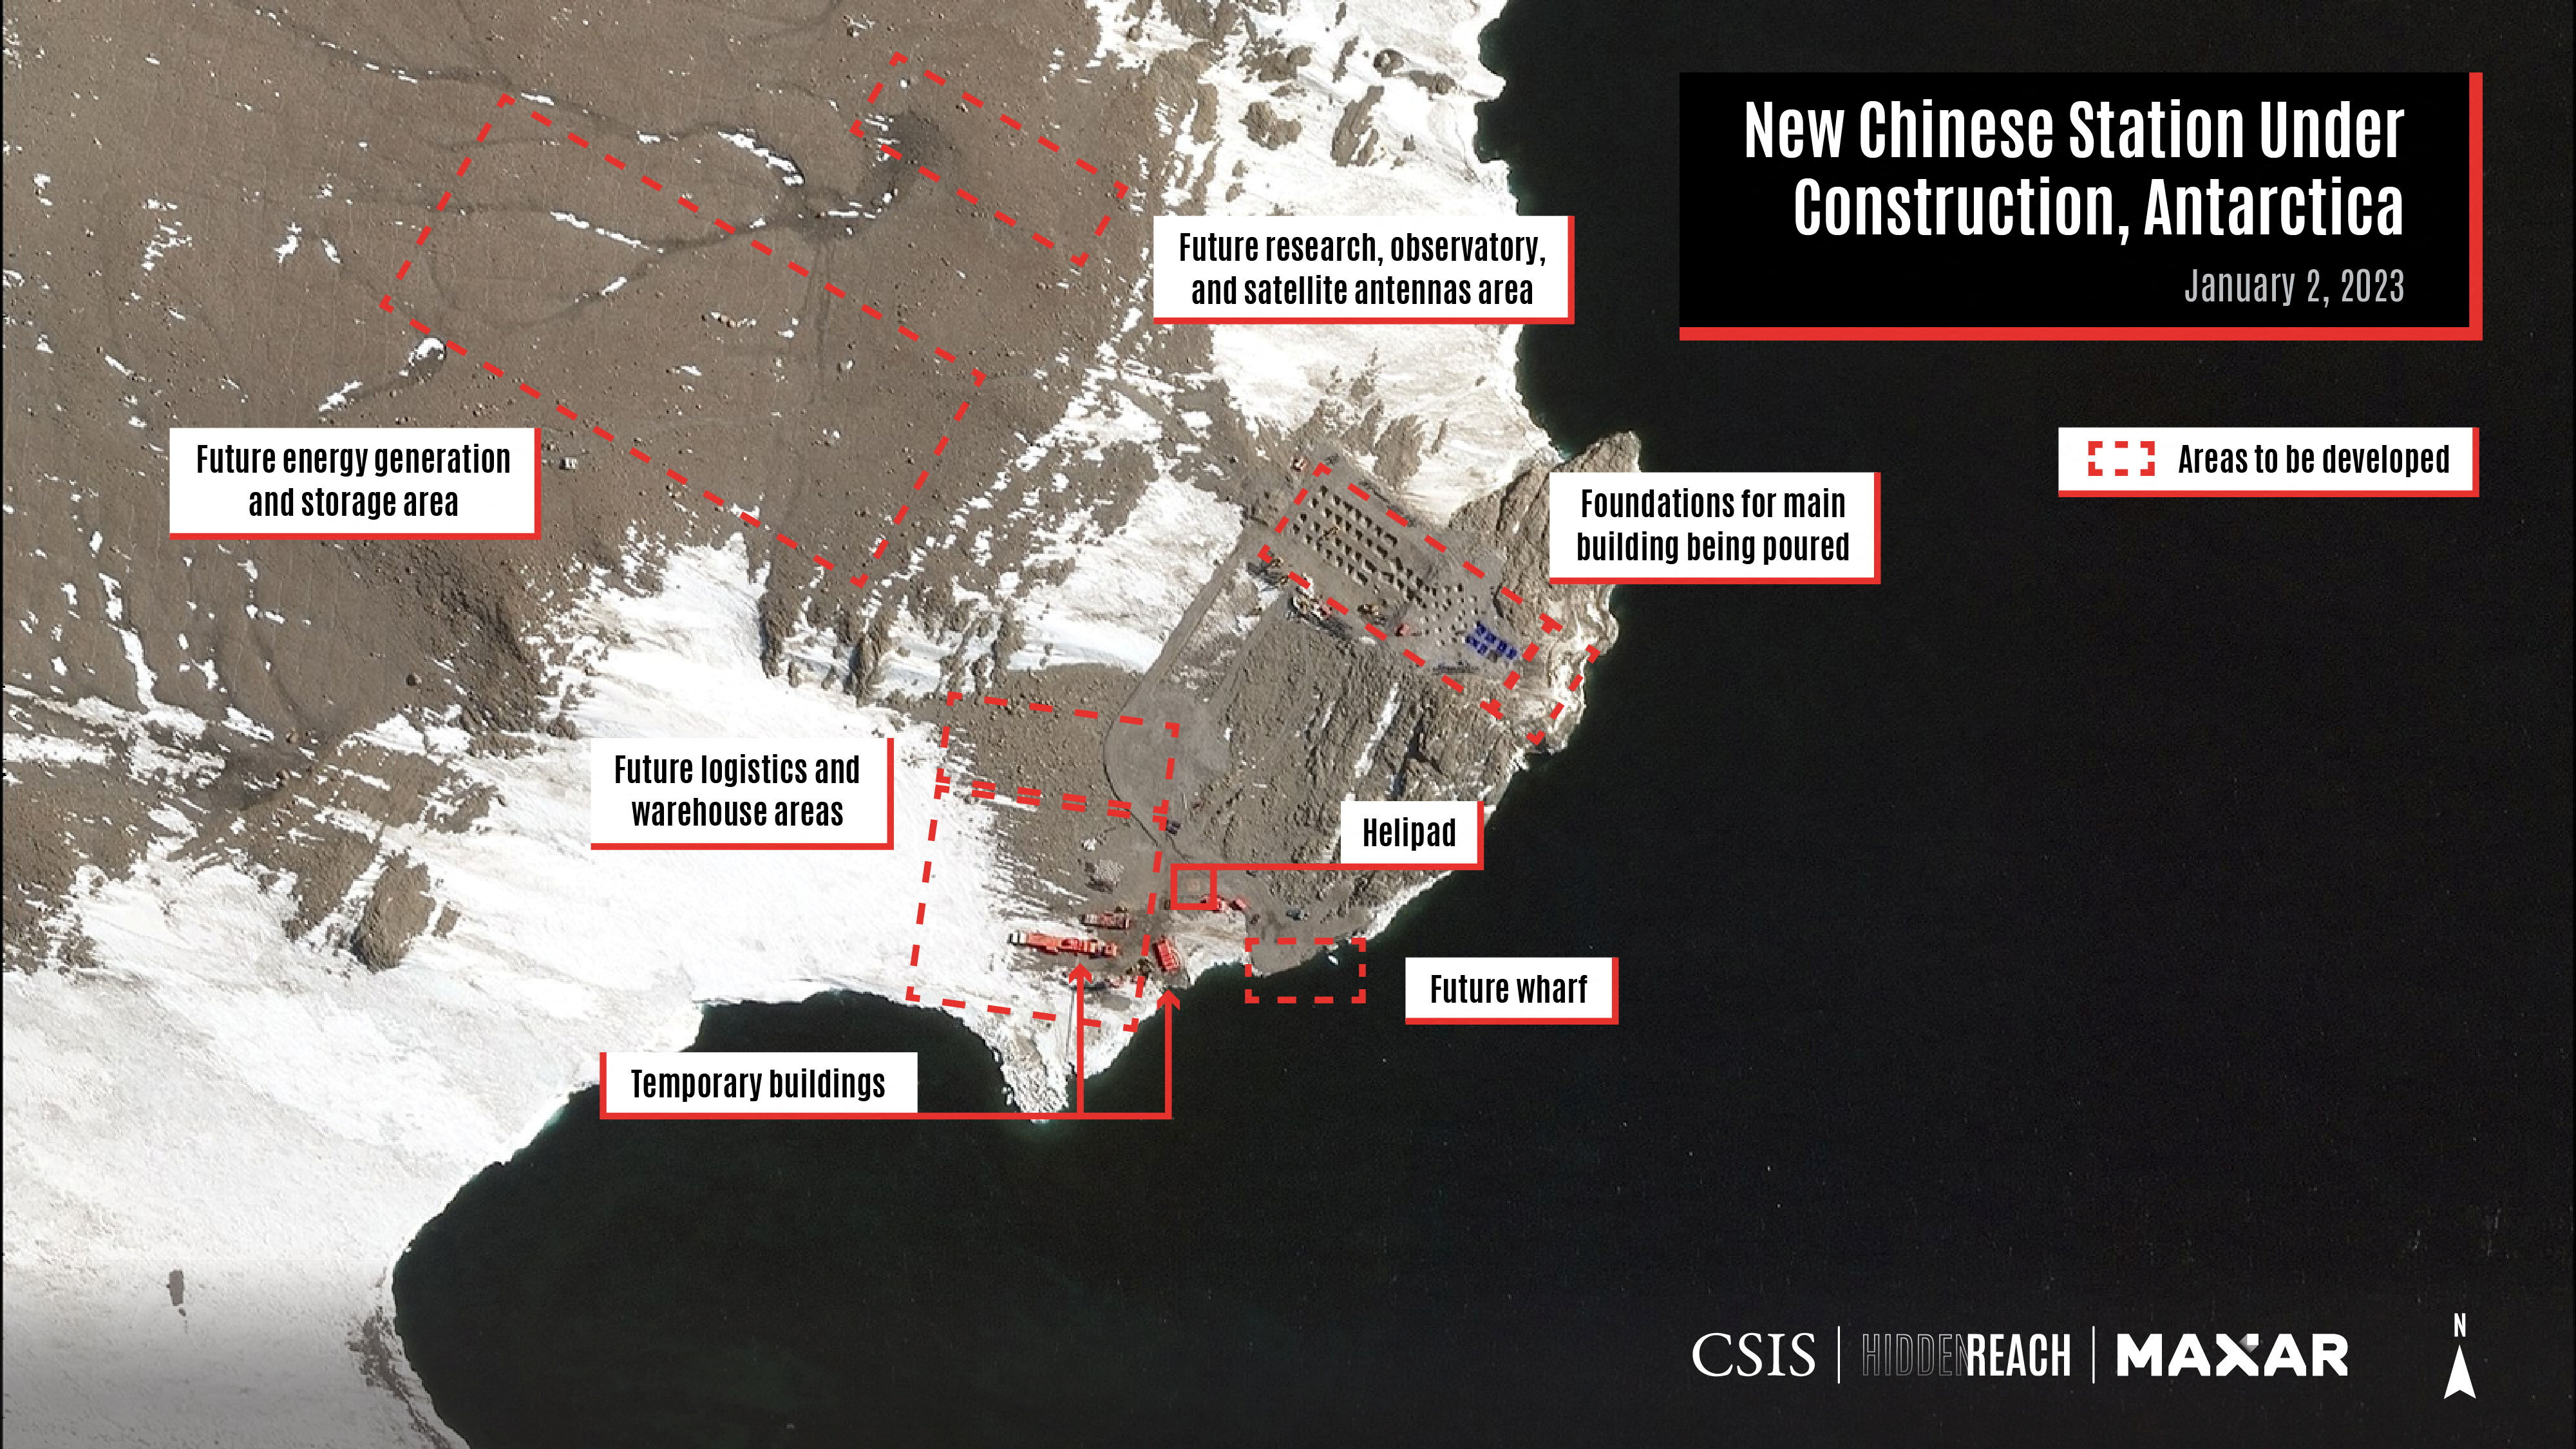 A satellite view with overlays shows areas to be developed at the new Chinese station under construction, on Inexpressible Island